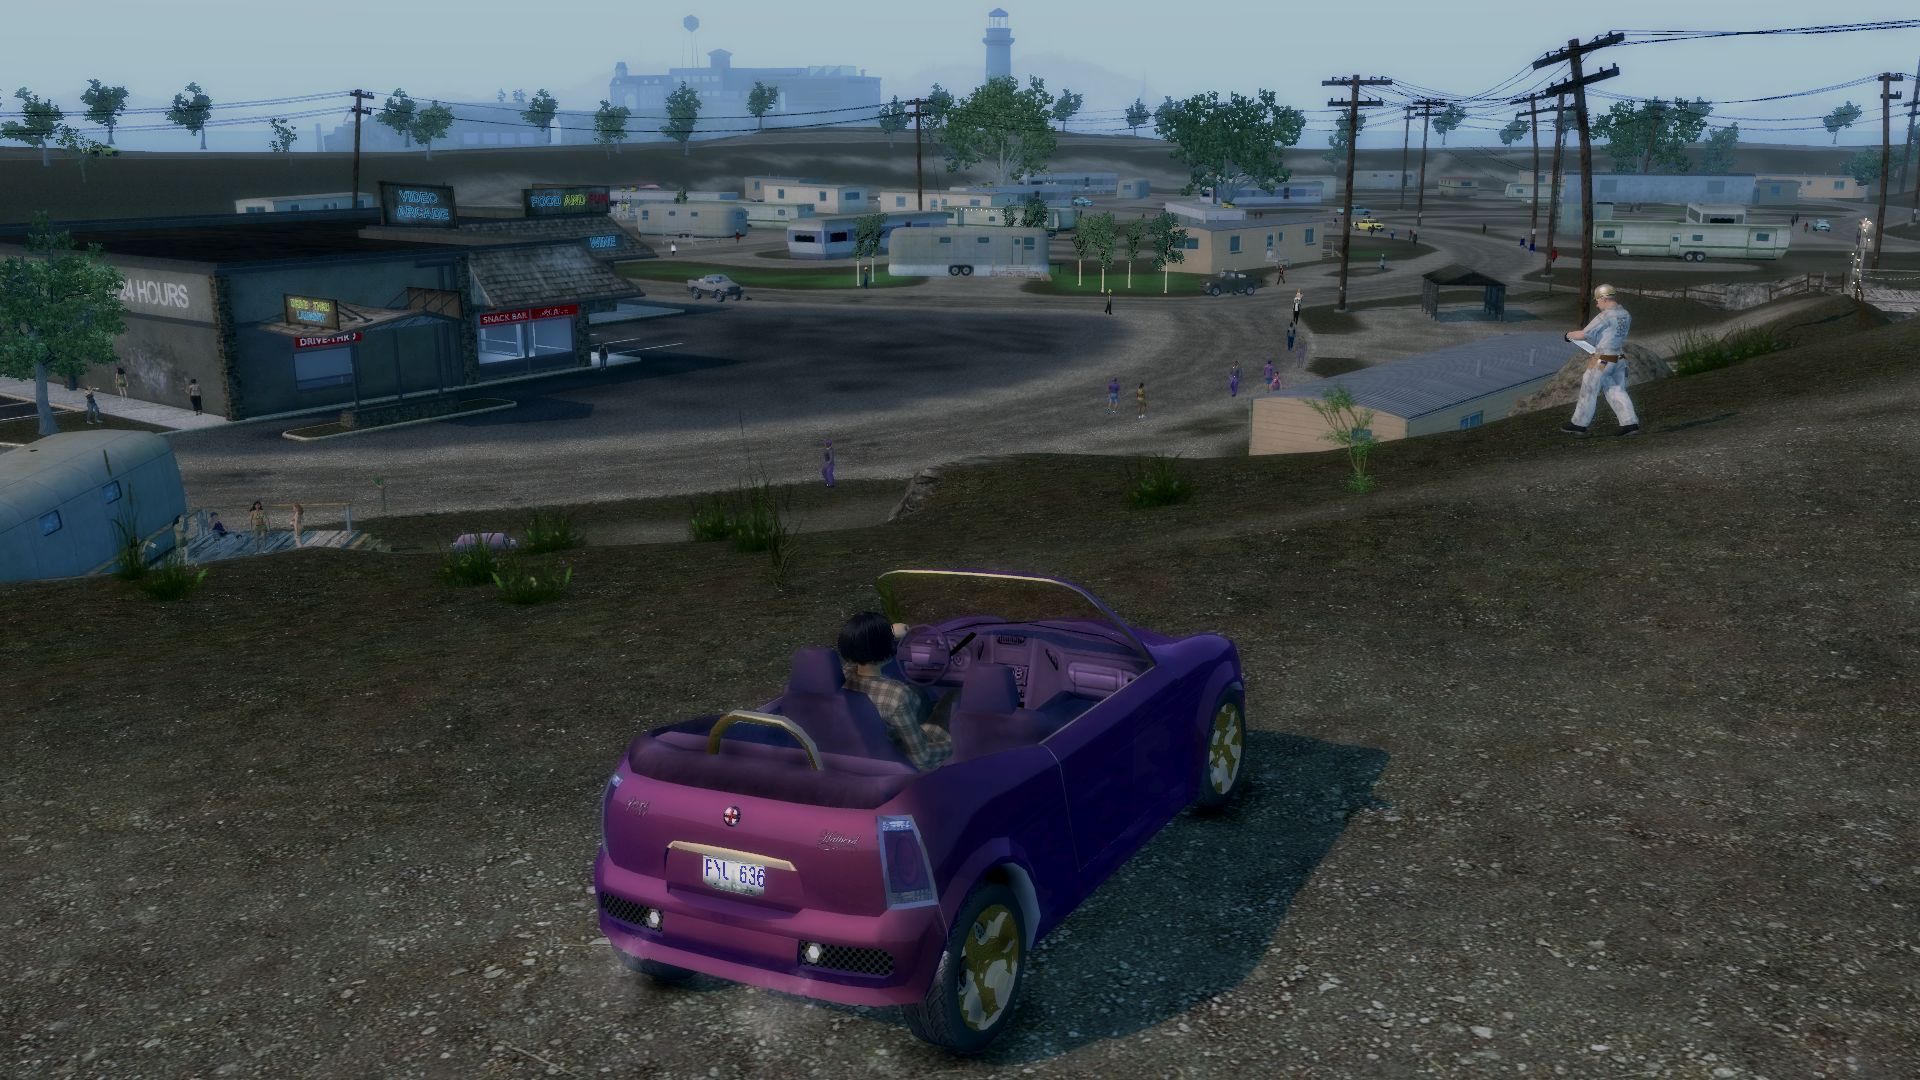 Saints Row 2 mods - General Games - Weight Gaming